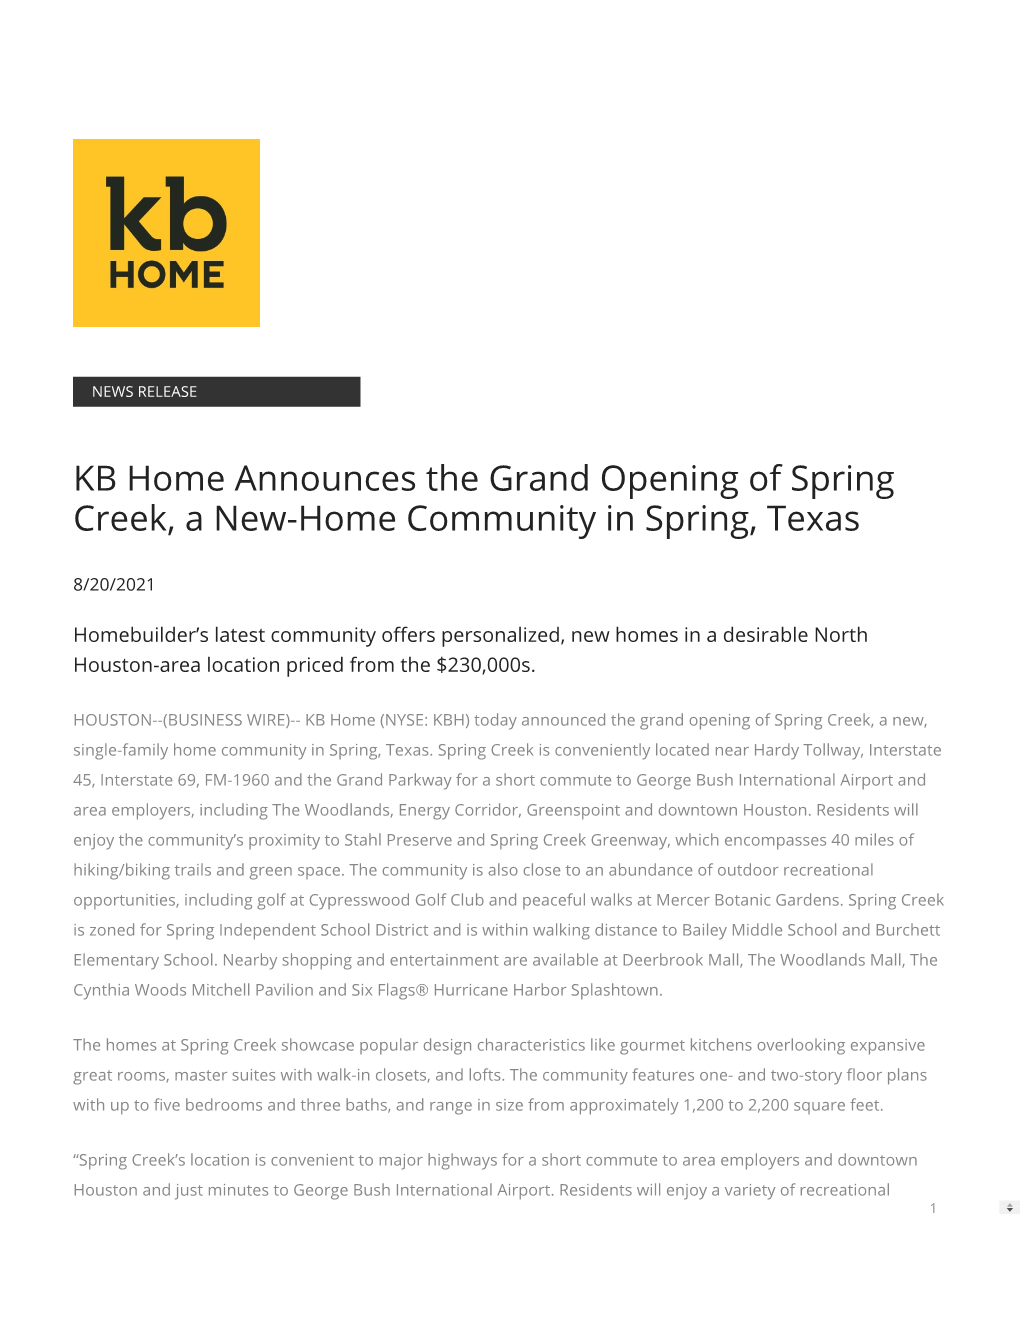 KB Home Announces the Grand Opening of Spring Creek, a New-Home Community in Spring, Texas